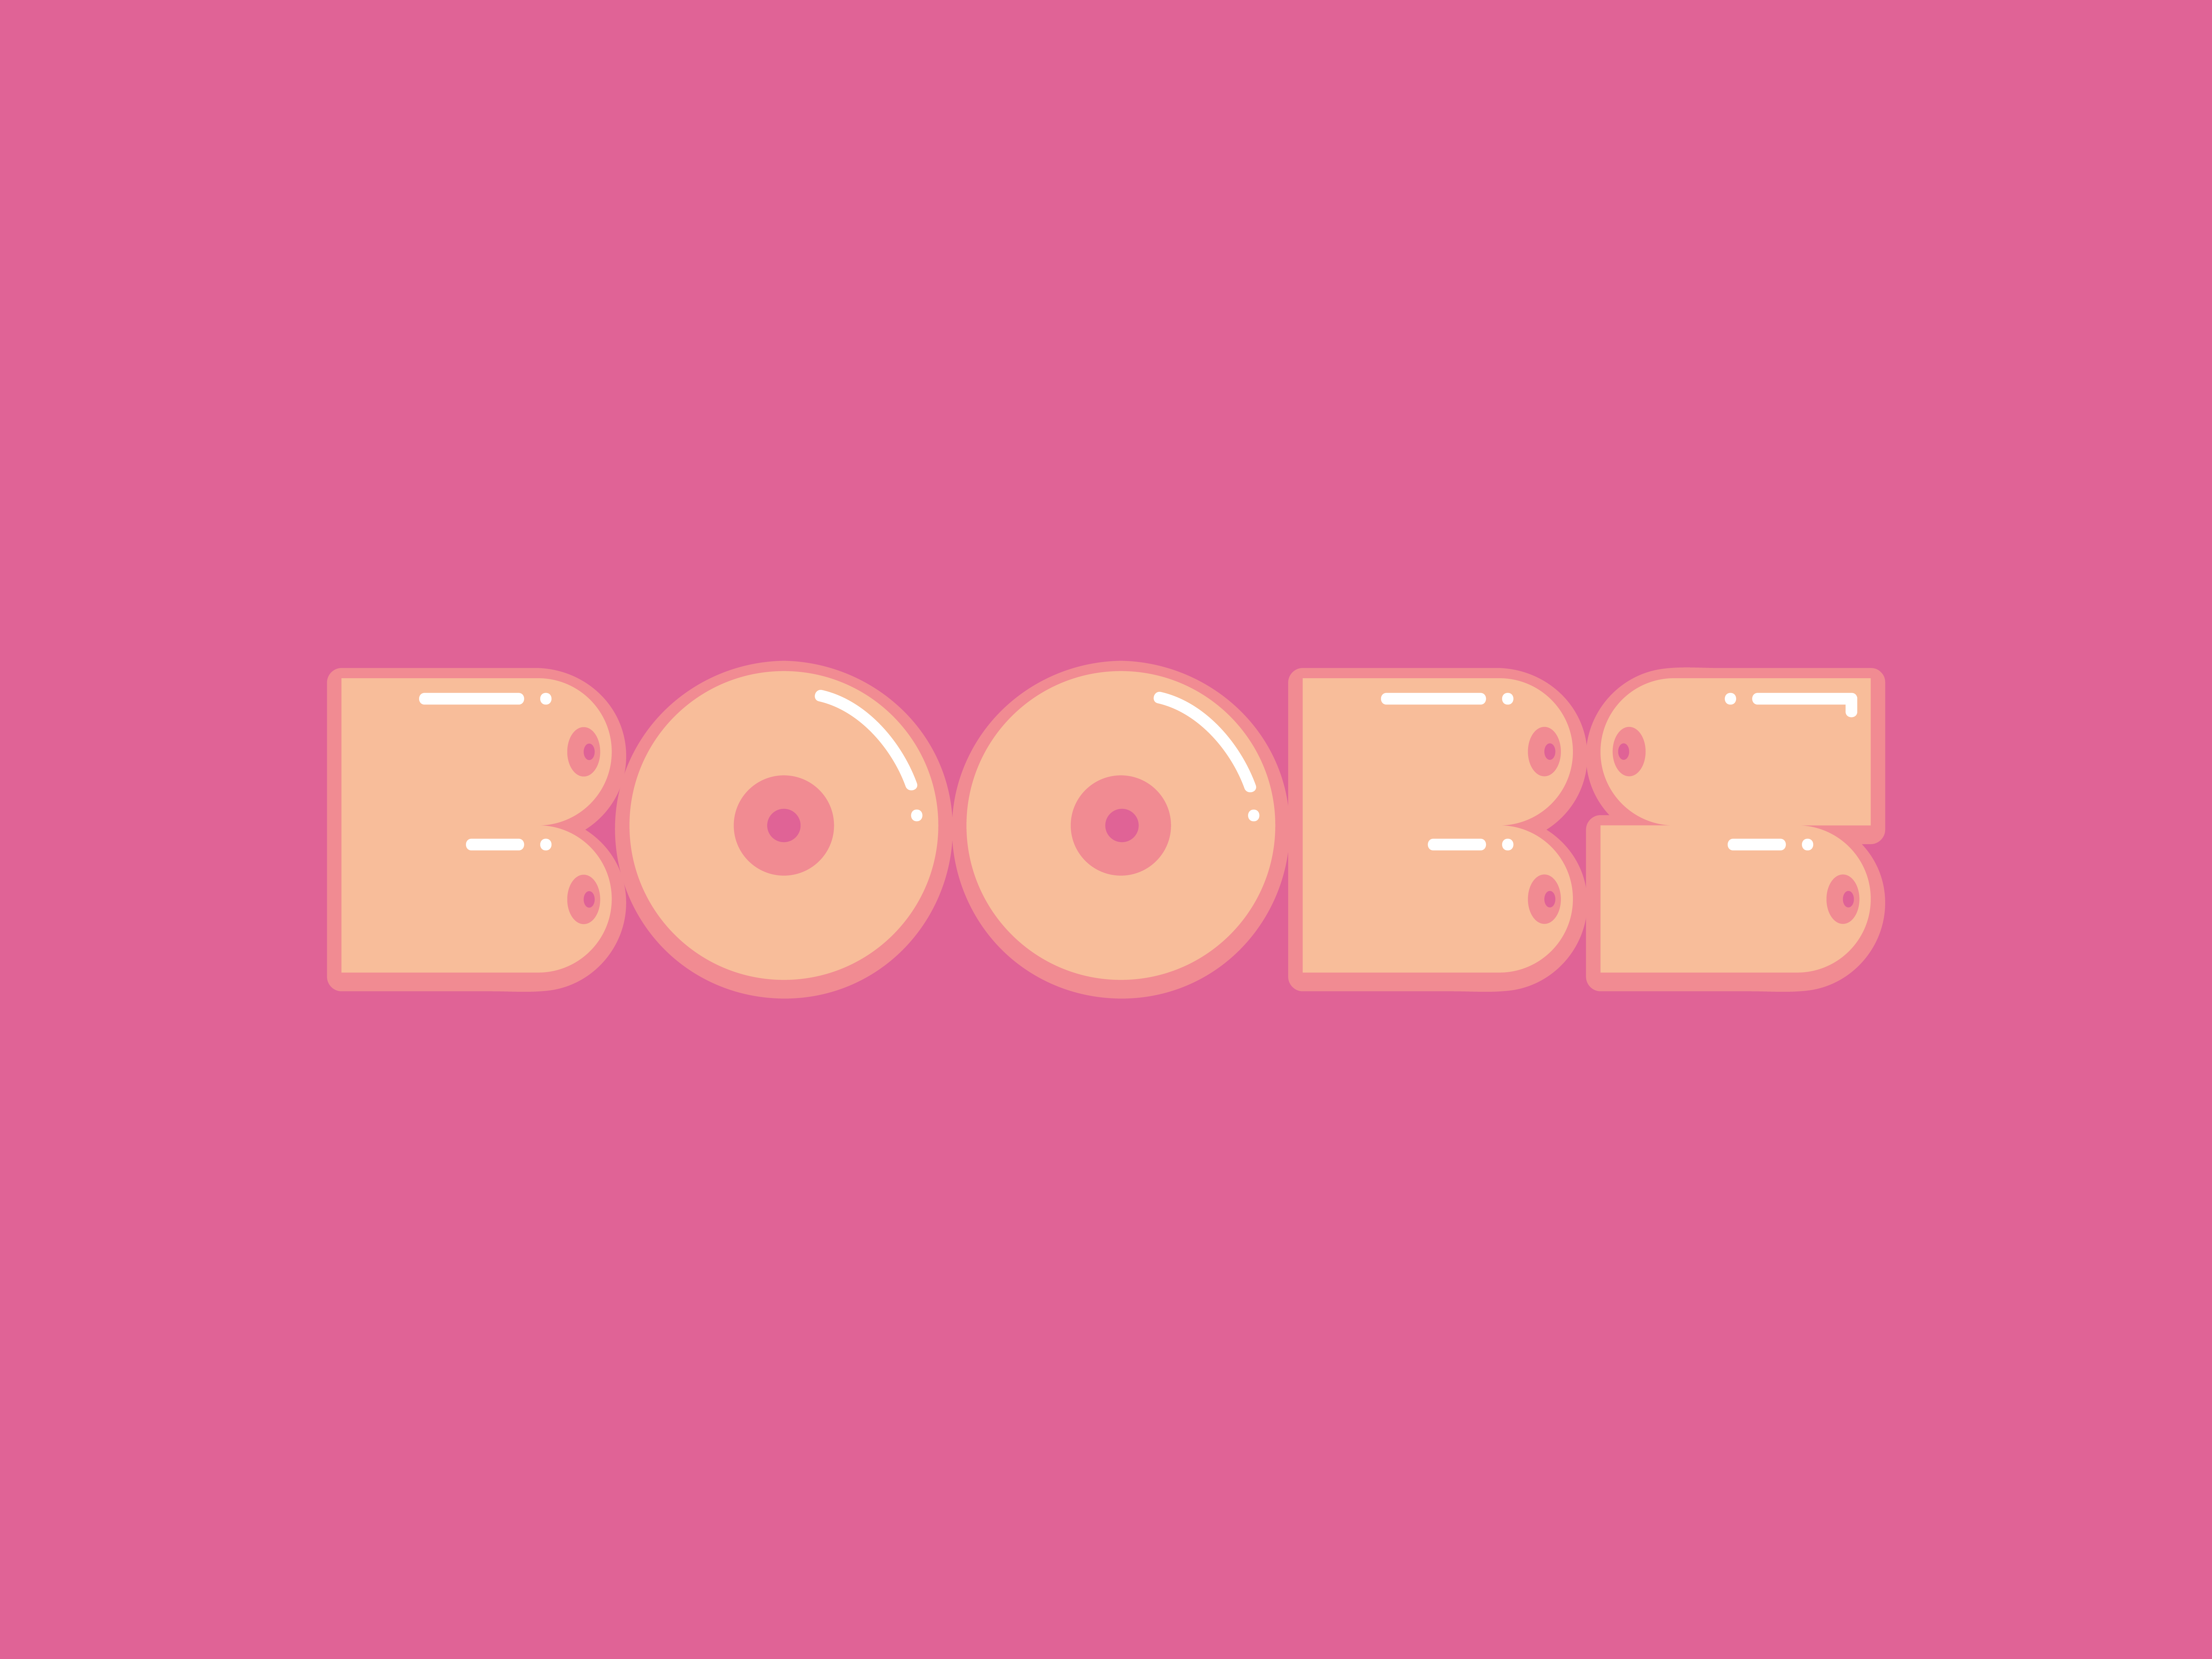 Boobs Type by Stephen Leadbetter on Dribbble